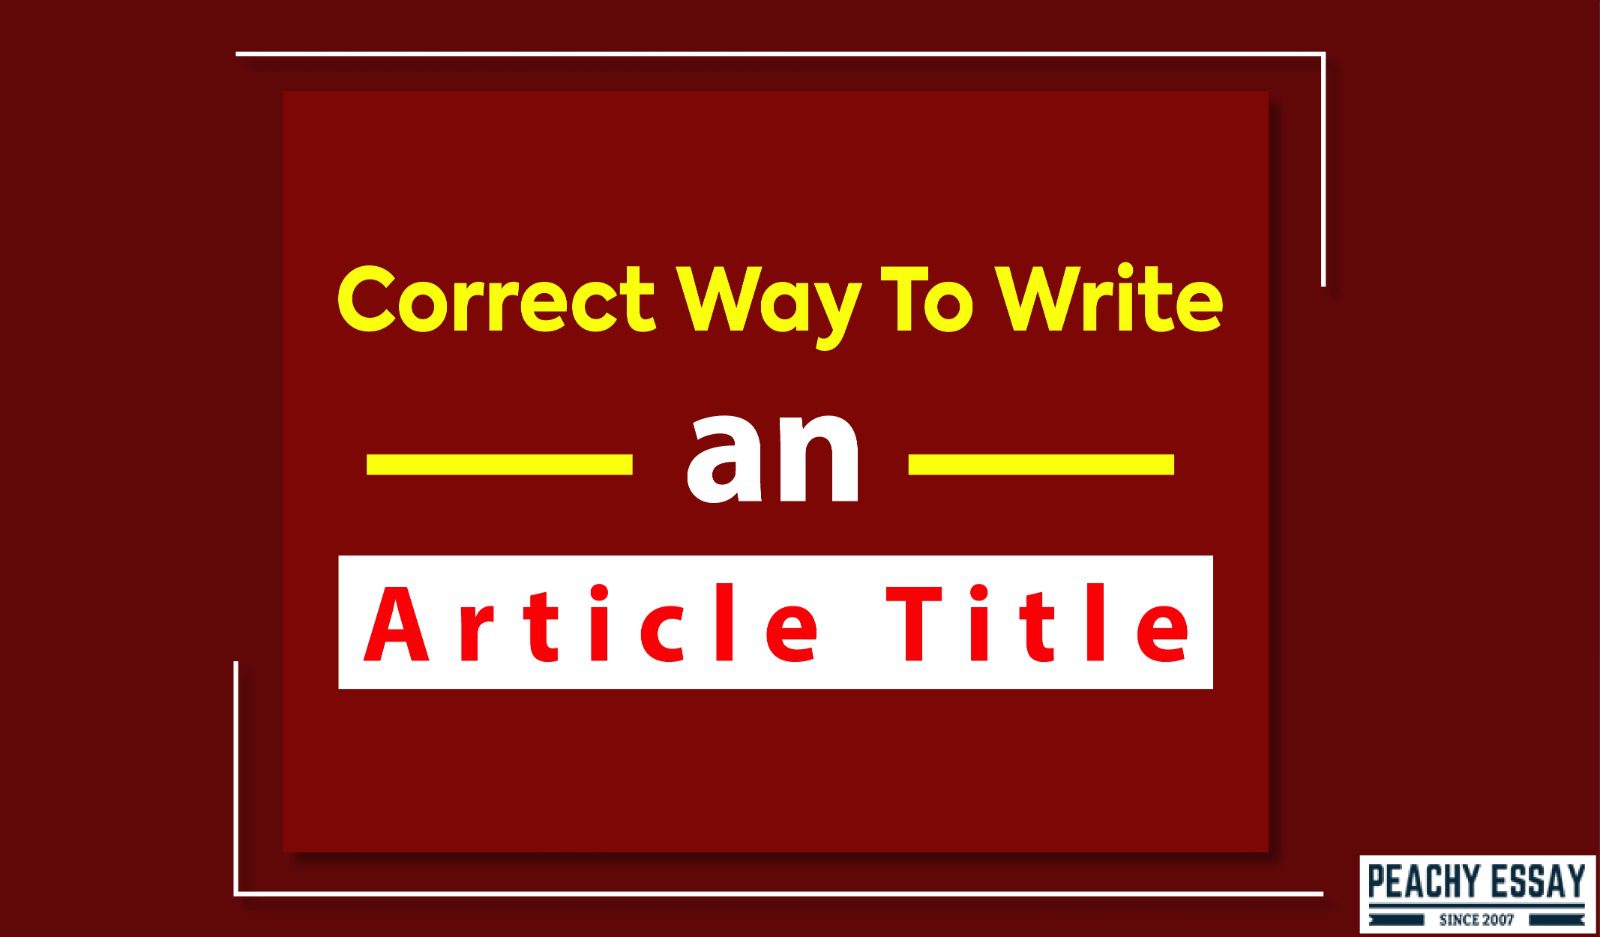 how to introduce an article title in an essay